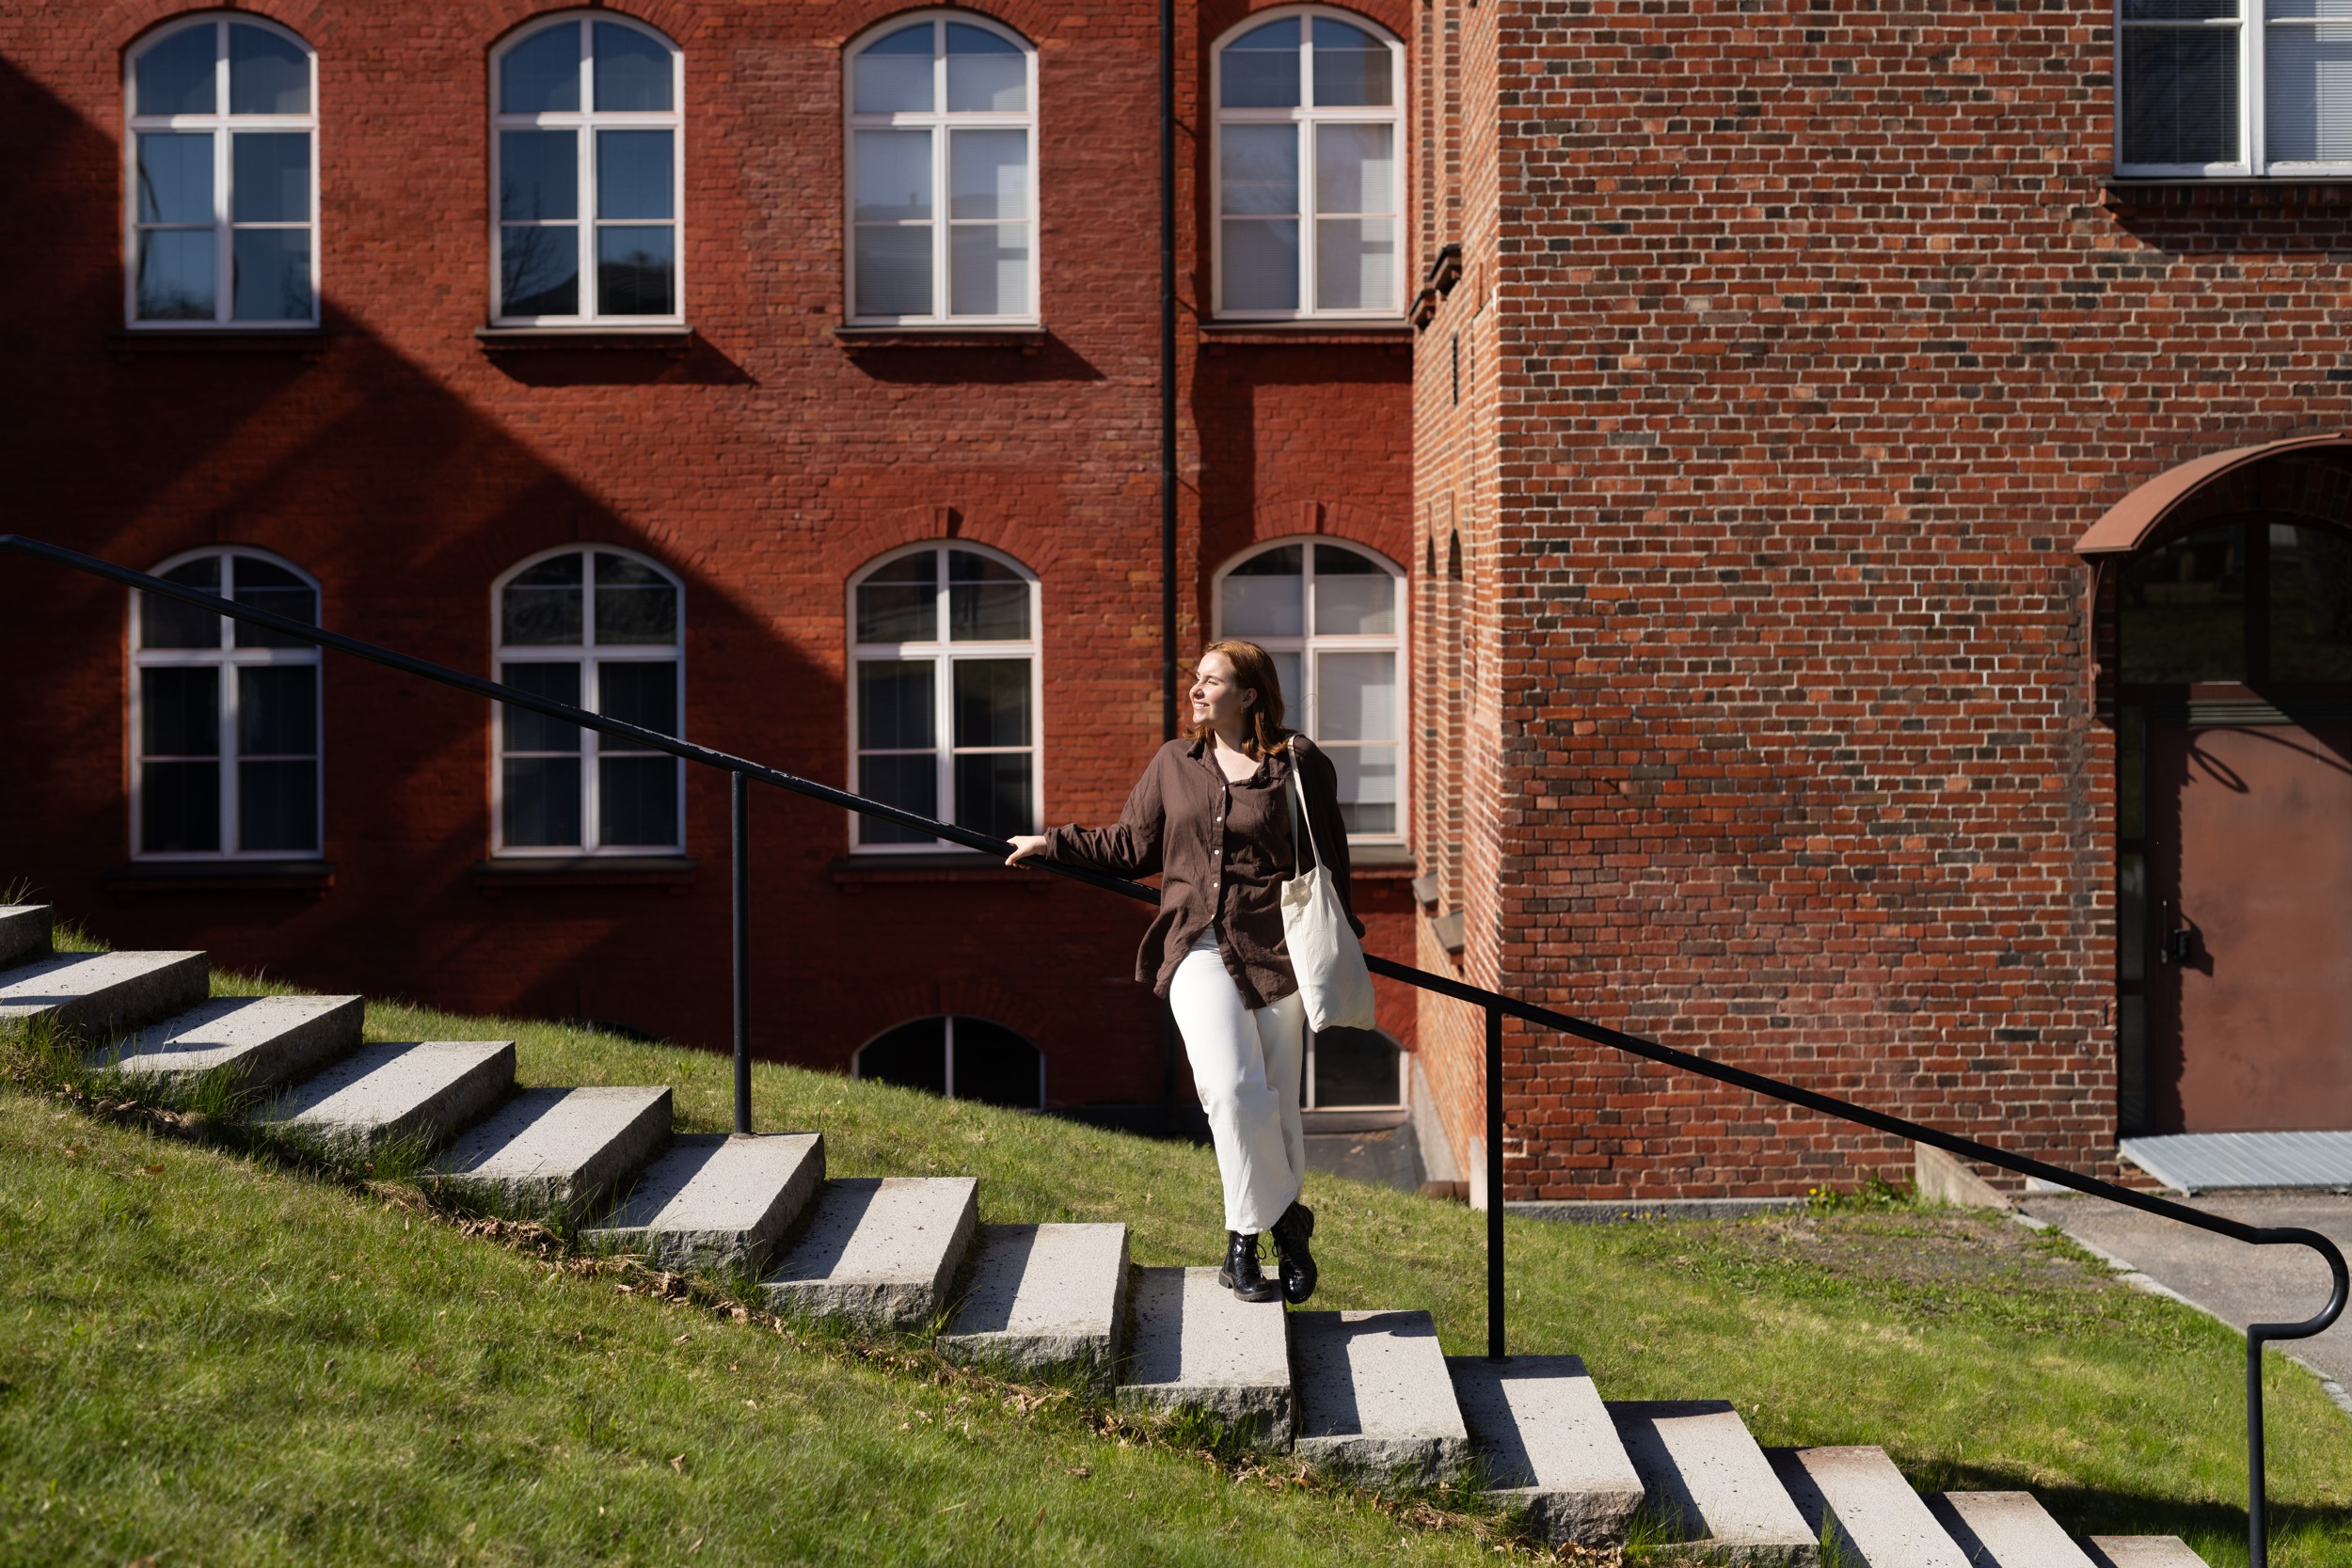 A spring day at the Forssa campus, the sun is shining. A woman is standing on the stairs and leaning on the railing.